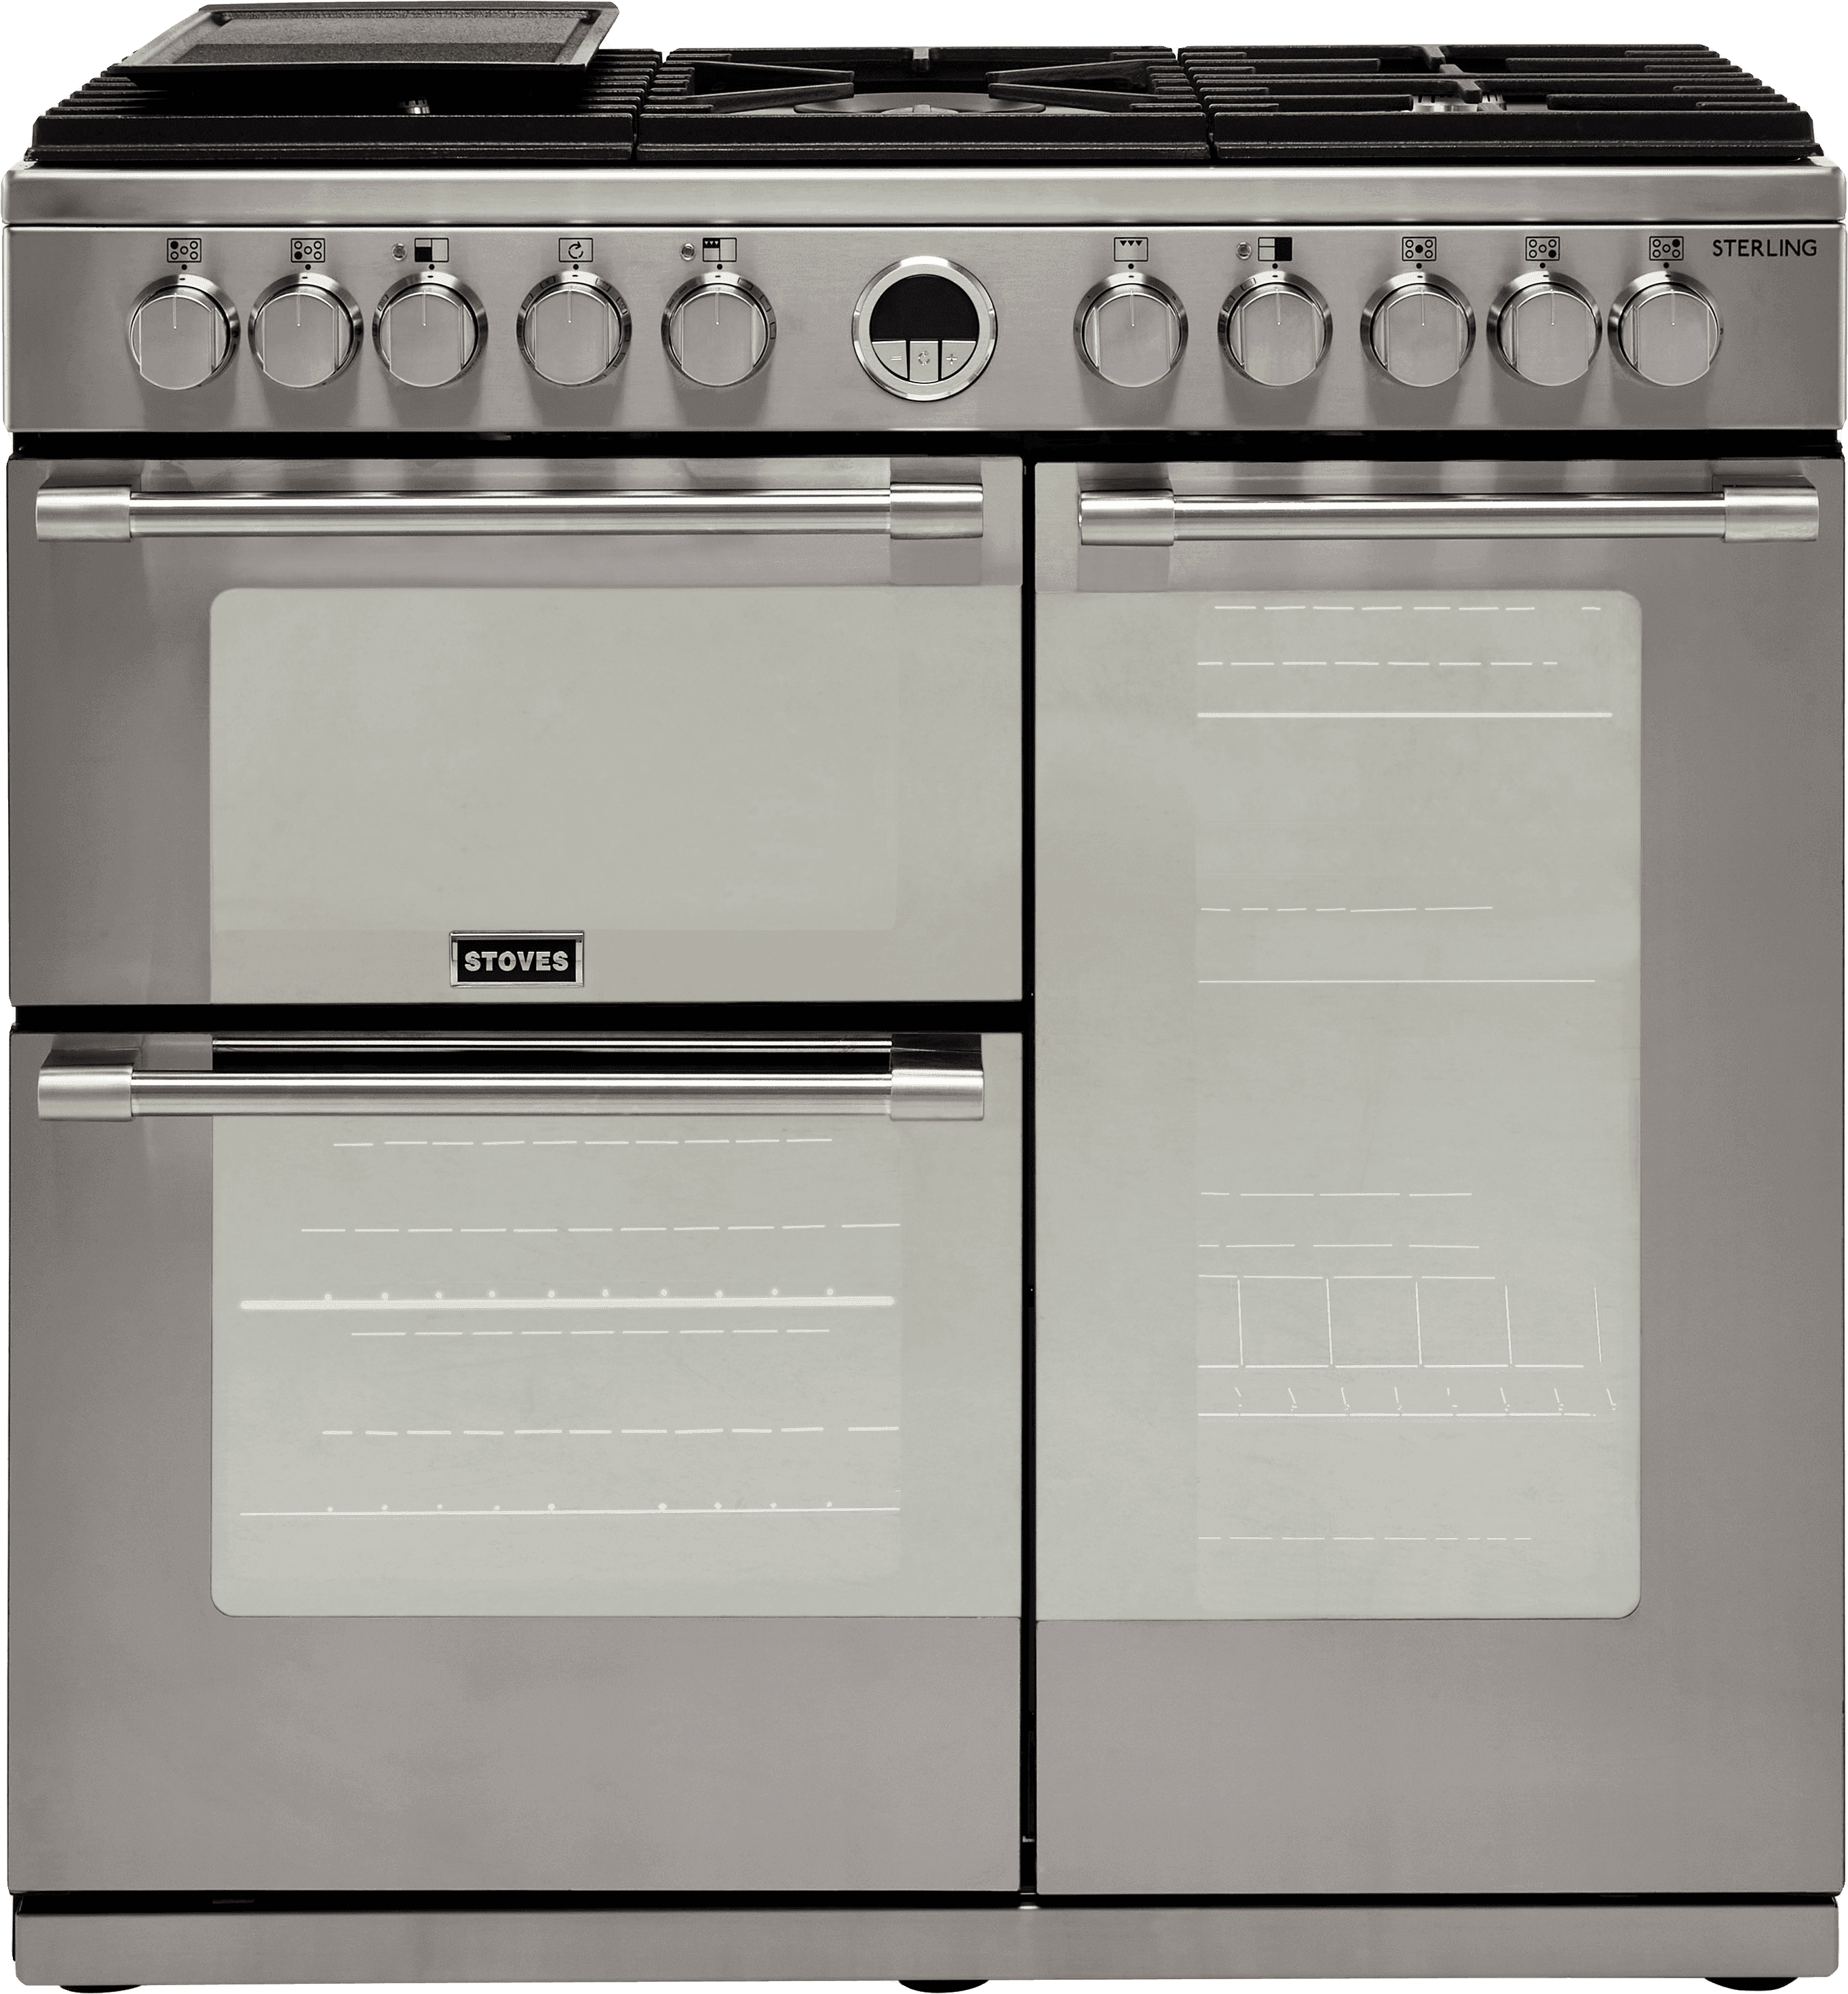 Stoves Sterling S900DF 90cm Dual Fuel Range Cooker - Stainless Steel - A/A/A Rated, Stainless Steel